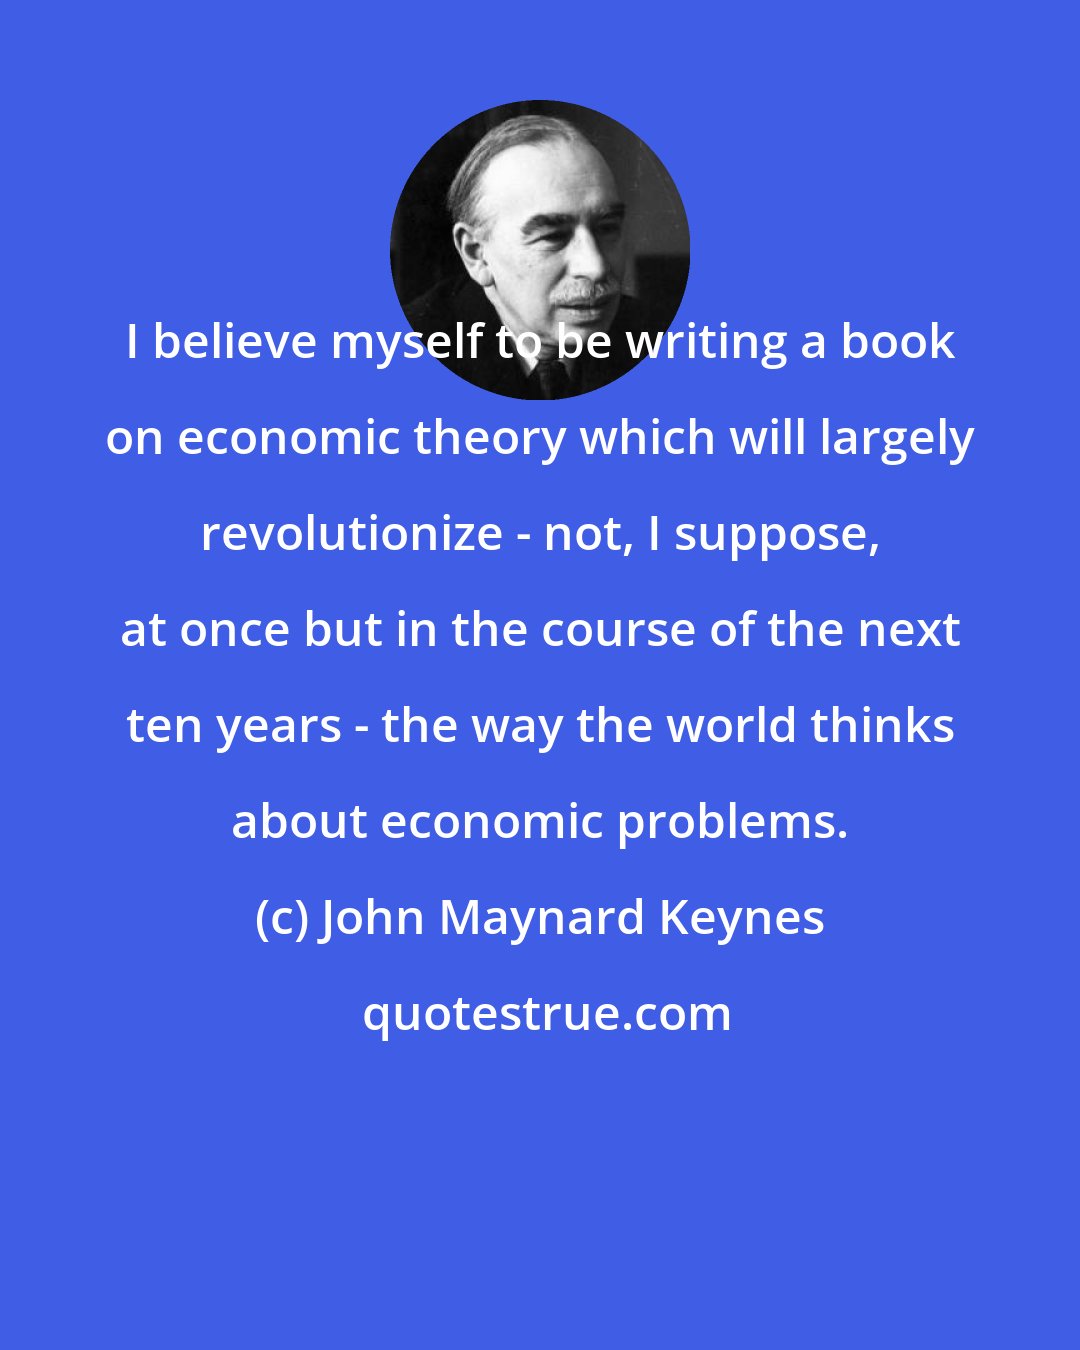 John Maynard Keynes: I believe myself to be writing a book on economic theory which will largely revolutionize - not, I suppose, at once but in the course of the next ten years - the way the world thinks about economic problems.